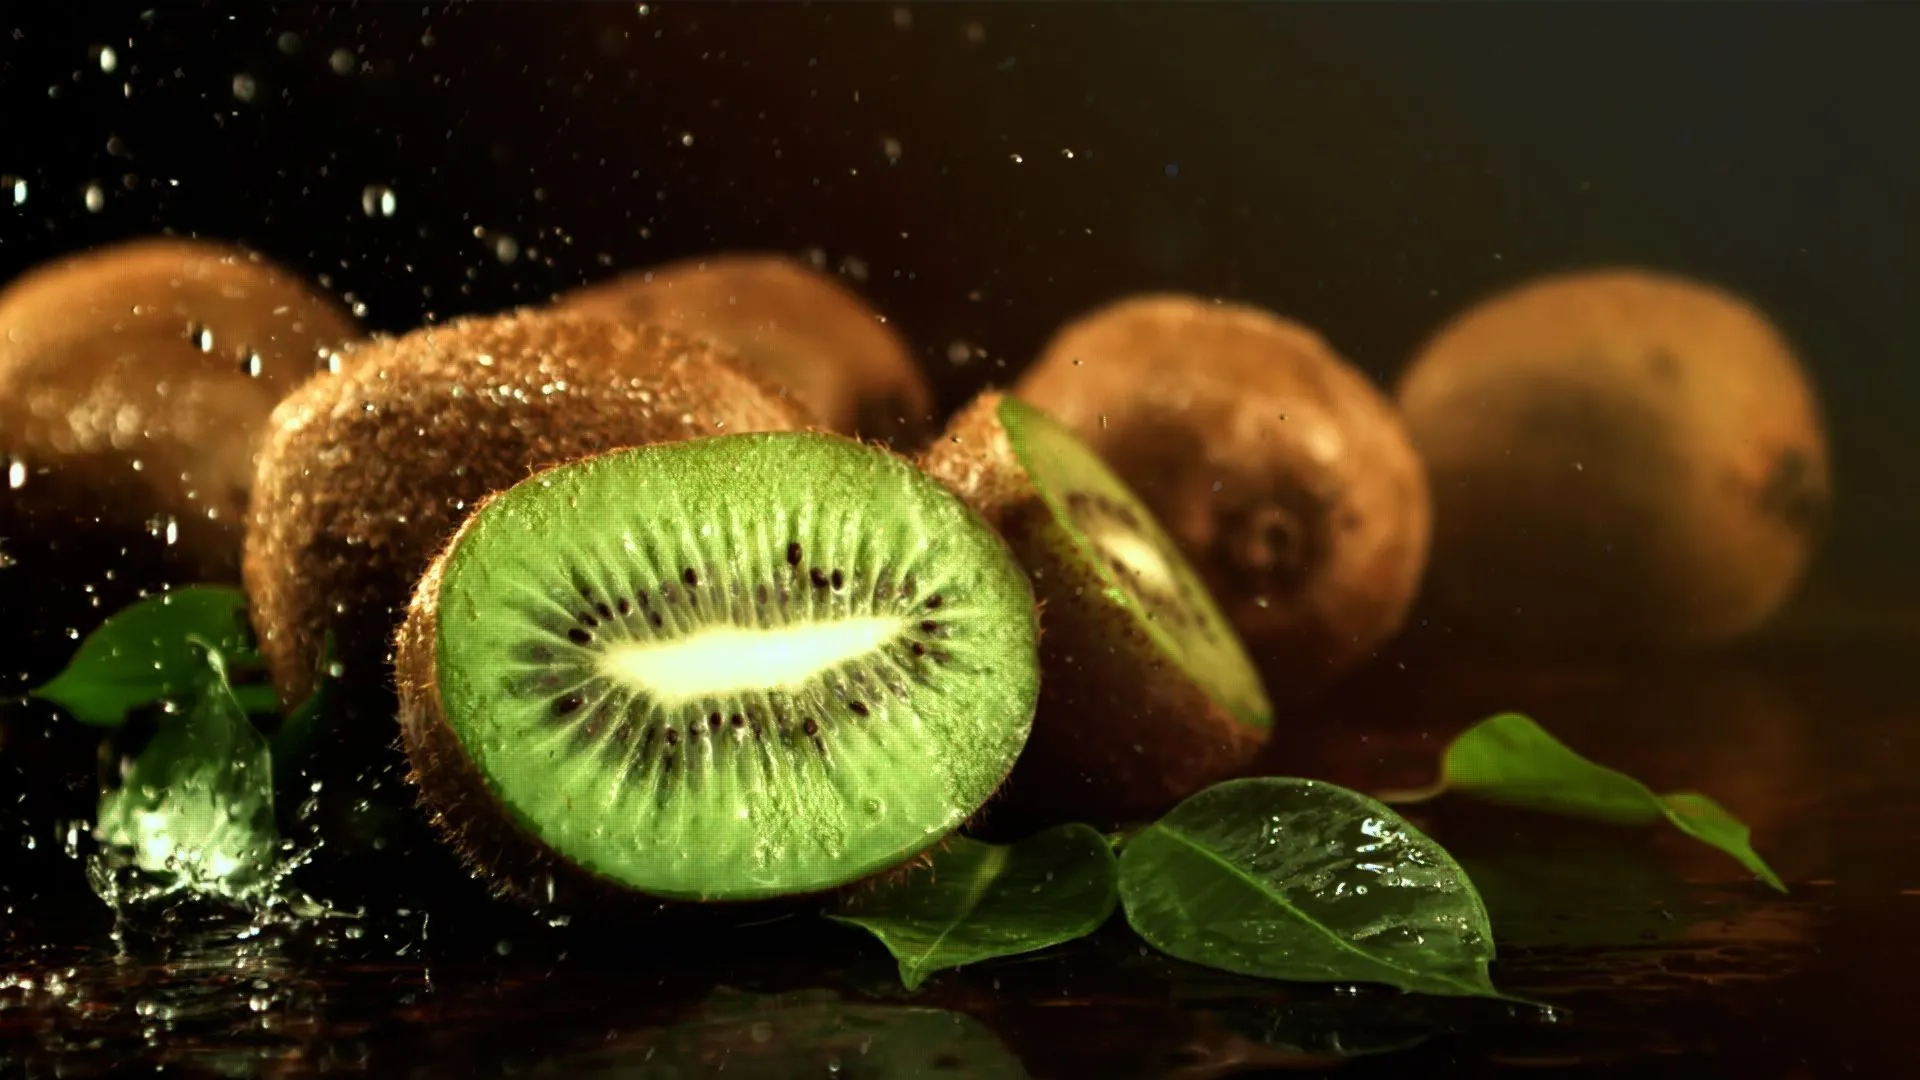 Trick 2 in 1: Peel and portion the kiwi immediately